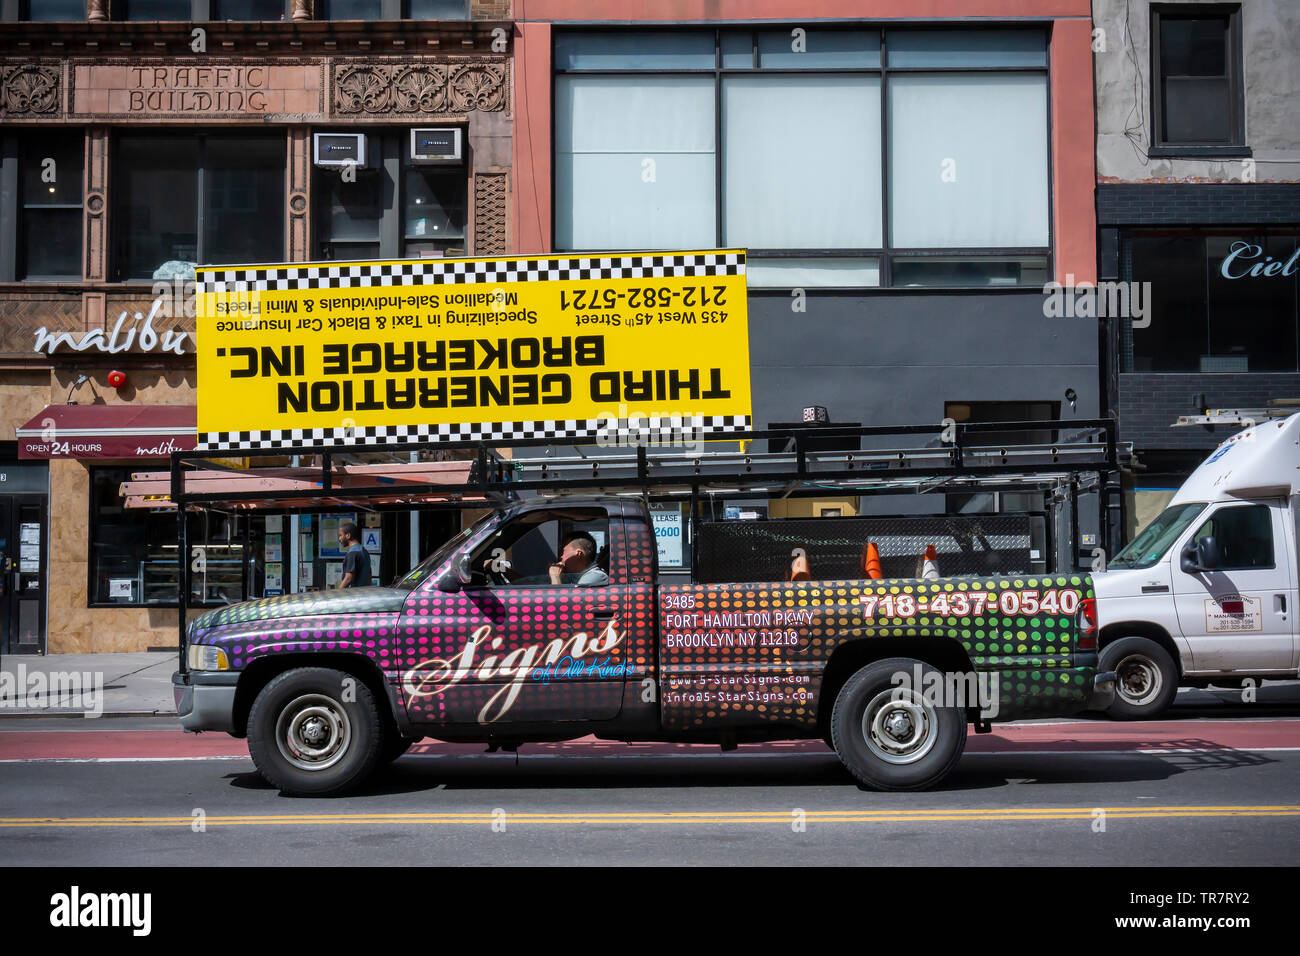 A sign maker on his way to install a sign for a taxi medallion broker in New York on Wednesday, May 22, 2019. Following an investigation by the New York Times the NYS Attorney General has launched a probe into the taxi medallion business and its loan practices. (© Richard B. Levine) Stock Photo